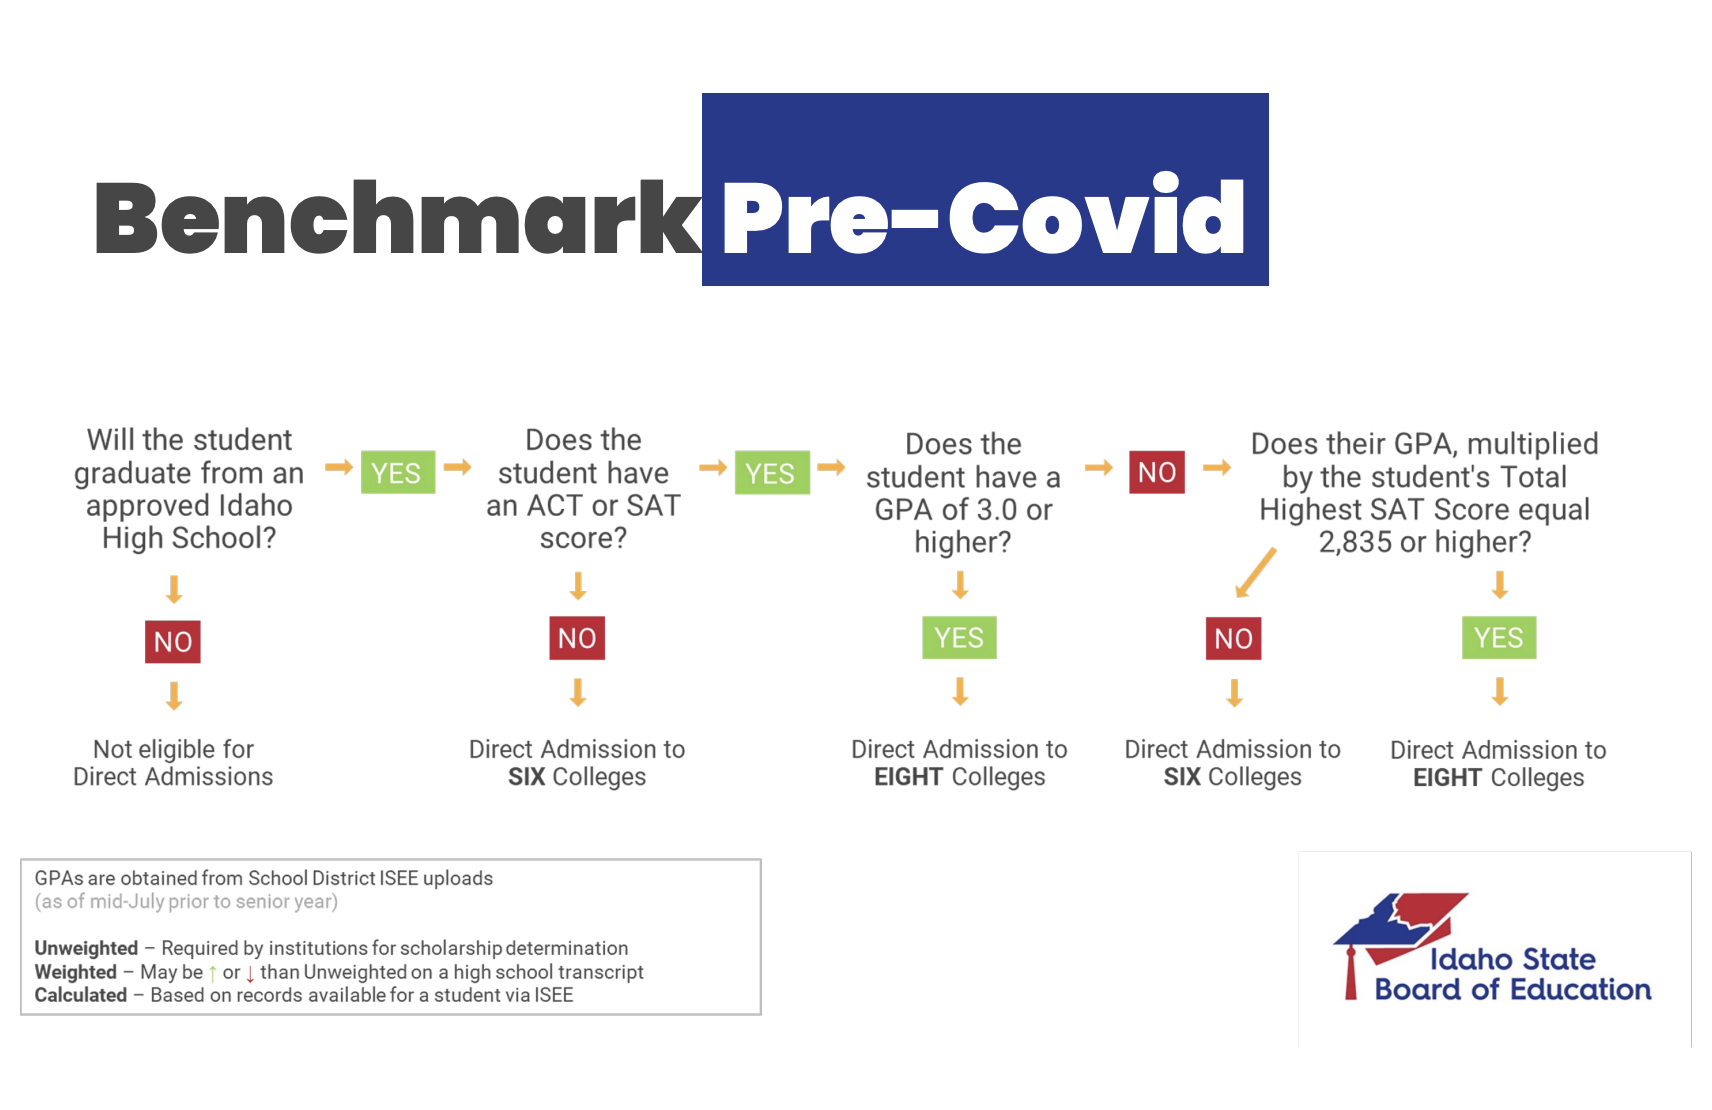 Benchmark Pre-covid image, decision tree with 